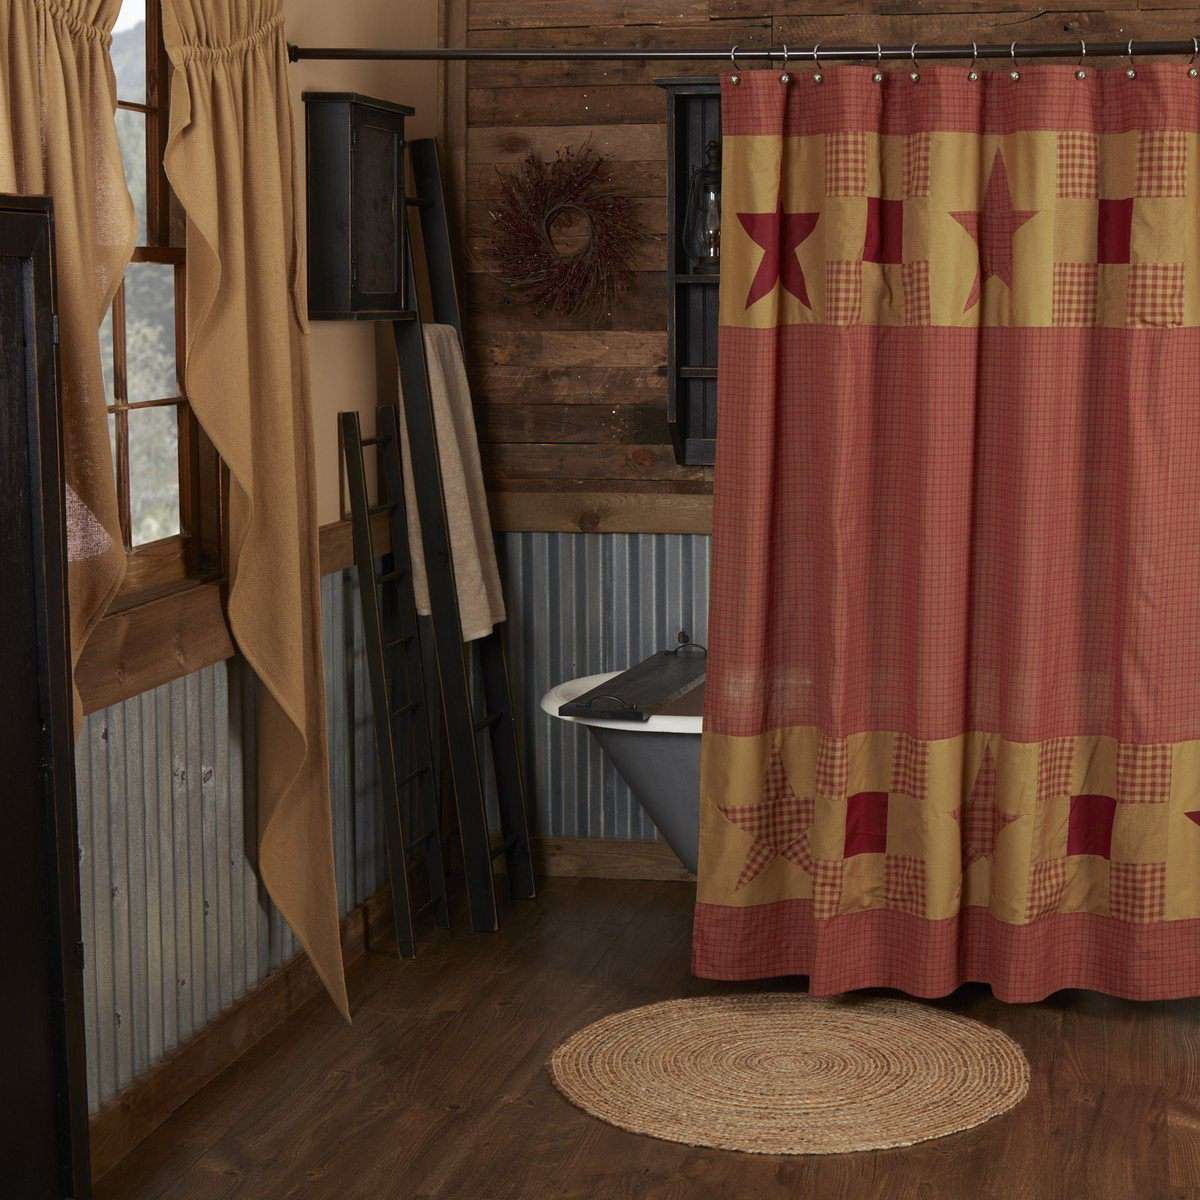 Ninepatch Star Shower Curtain w/ Patchwork Borders 72"x72" curtain VHC Brands 